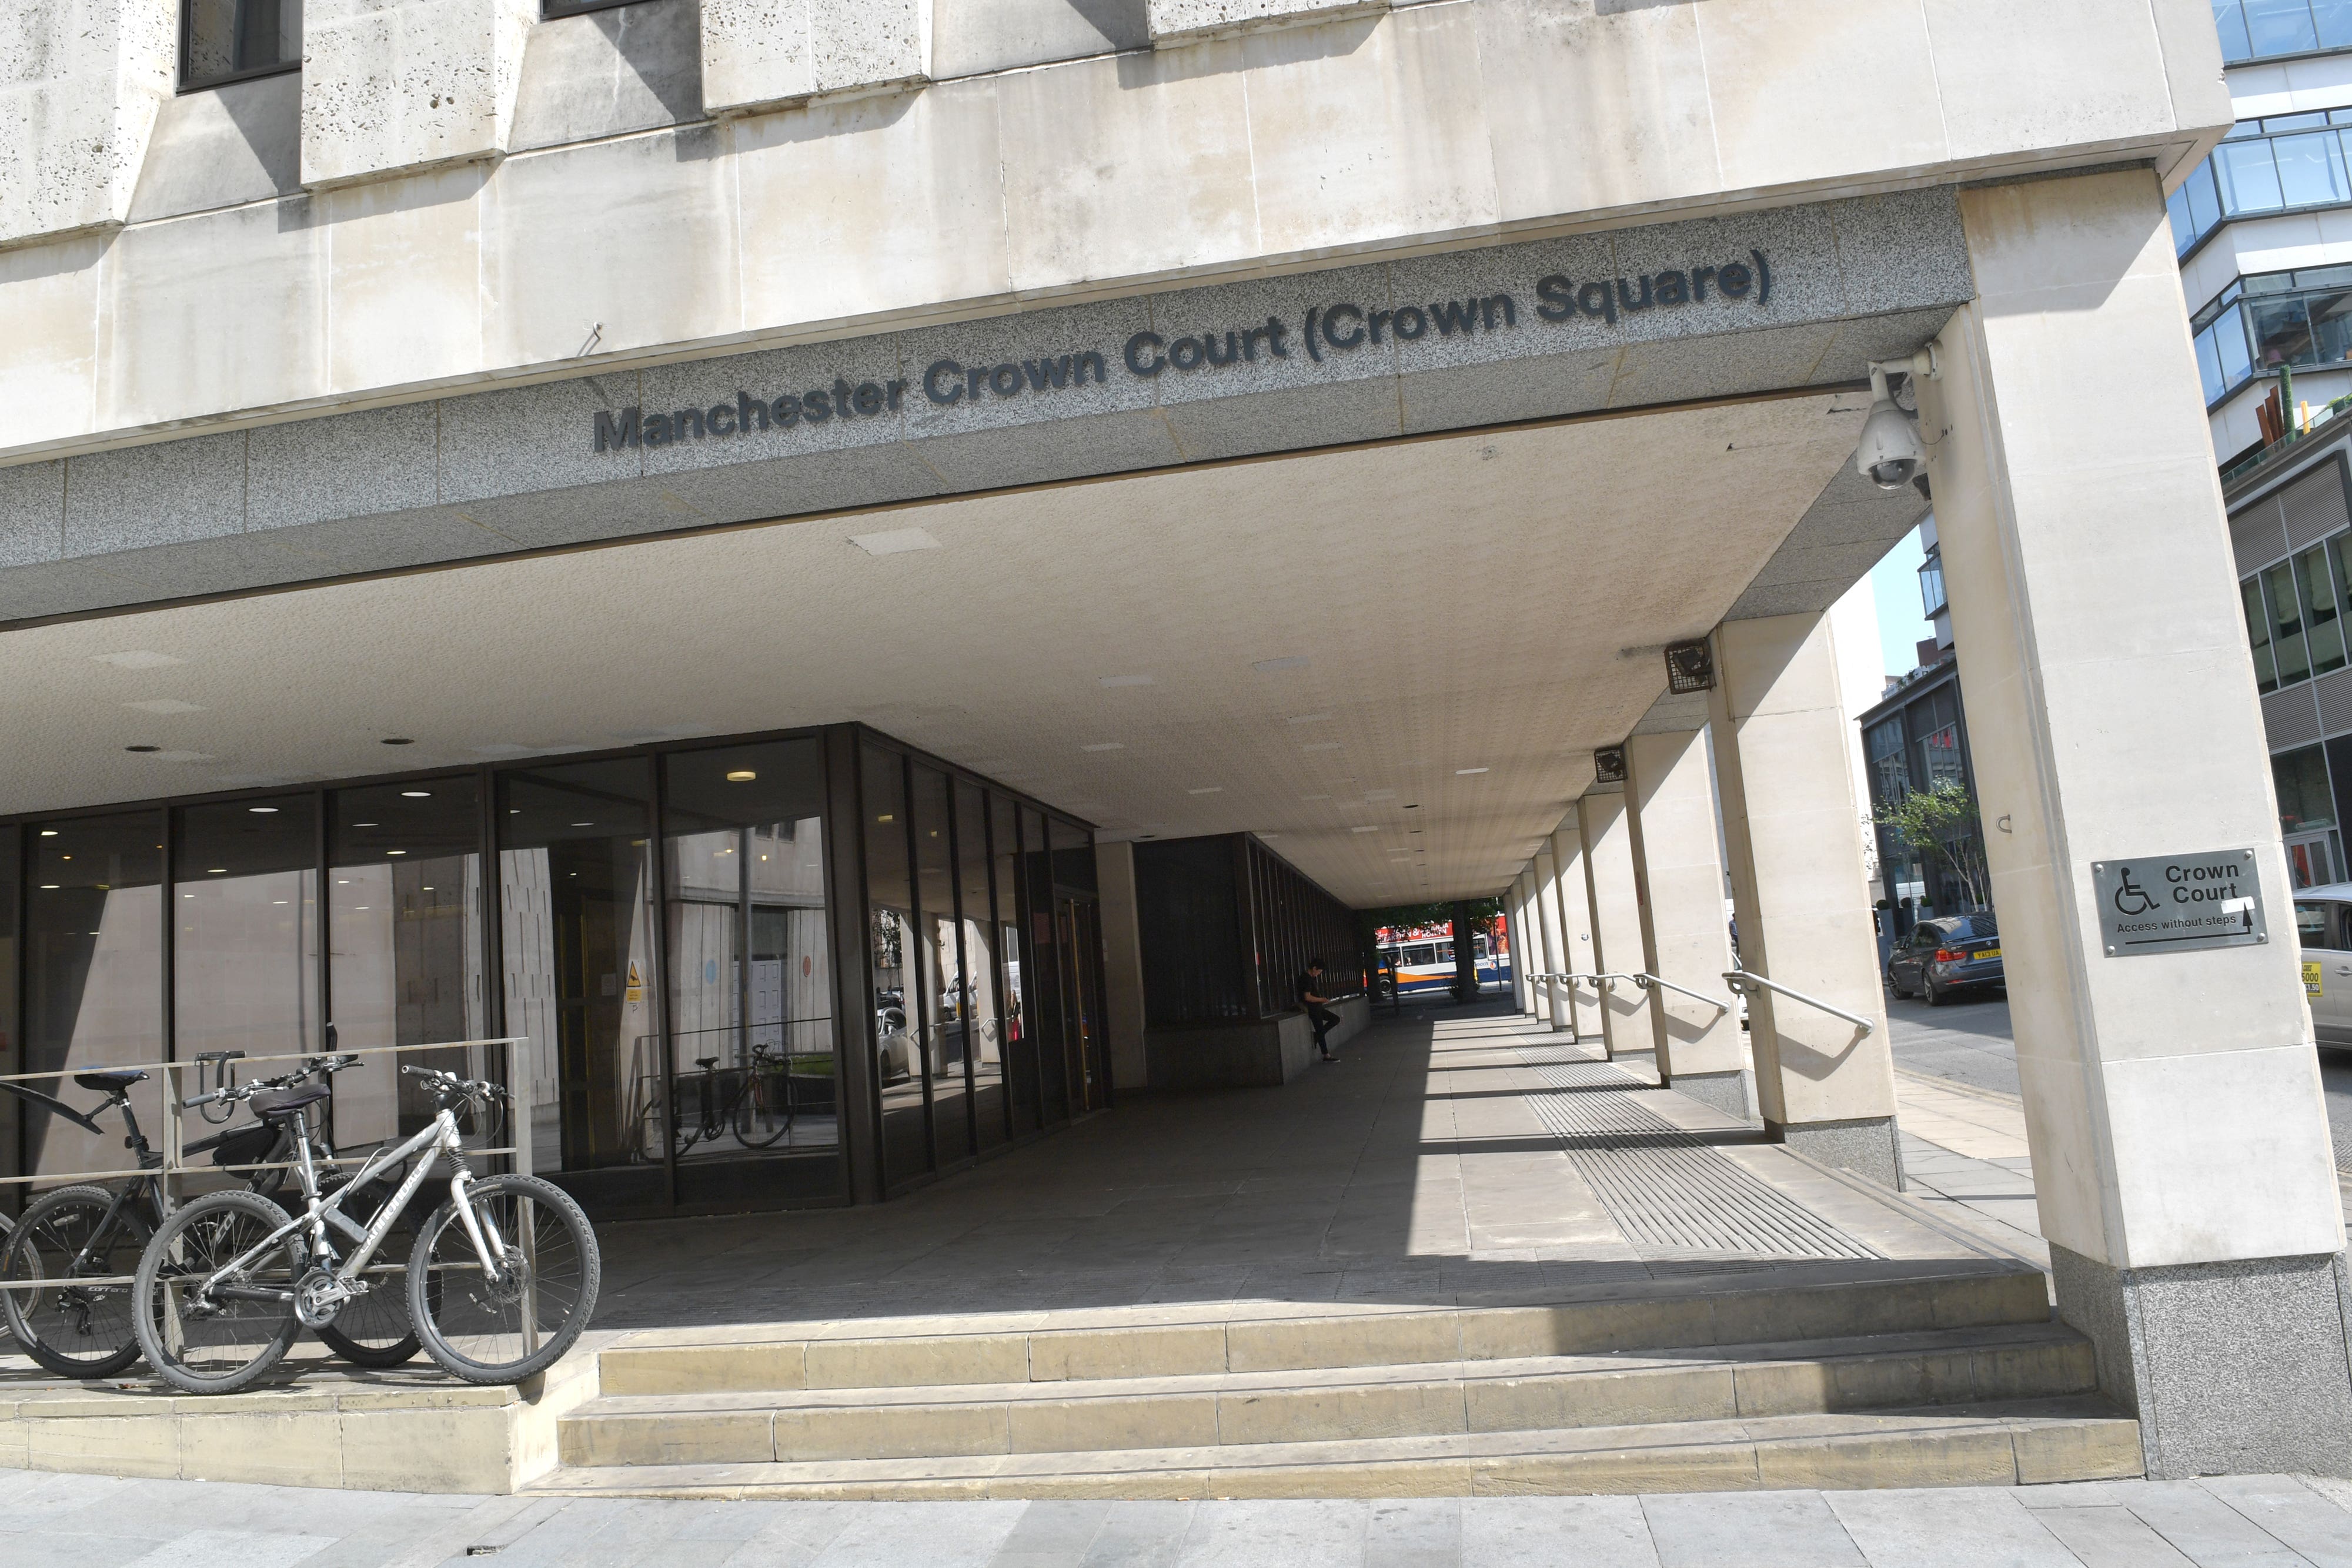 She has denied manslaughter and is currently on trial at Manchester Crown Court